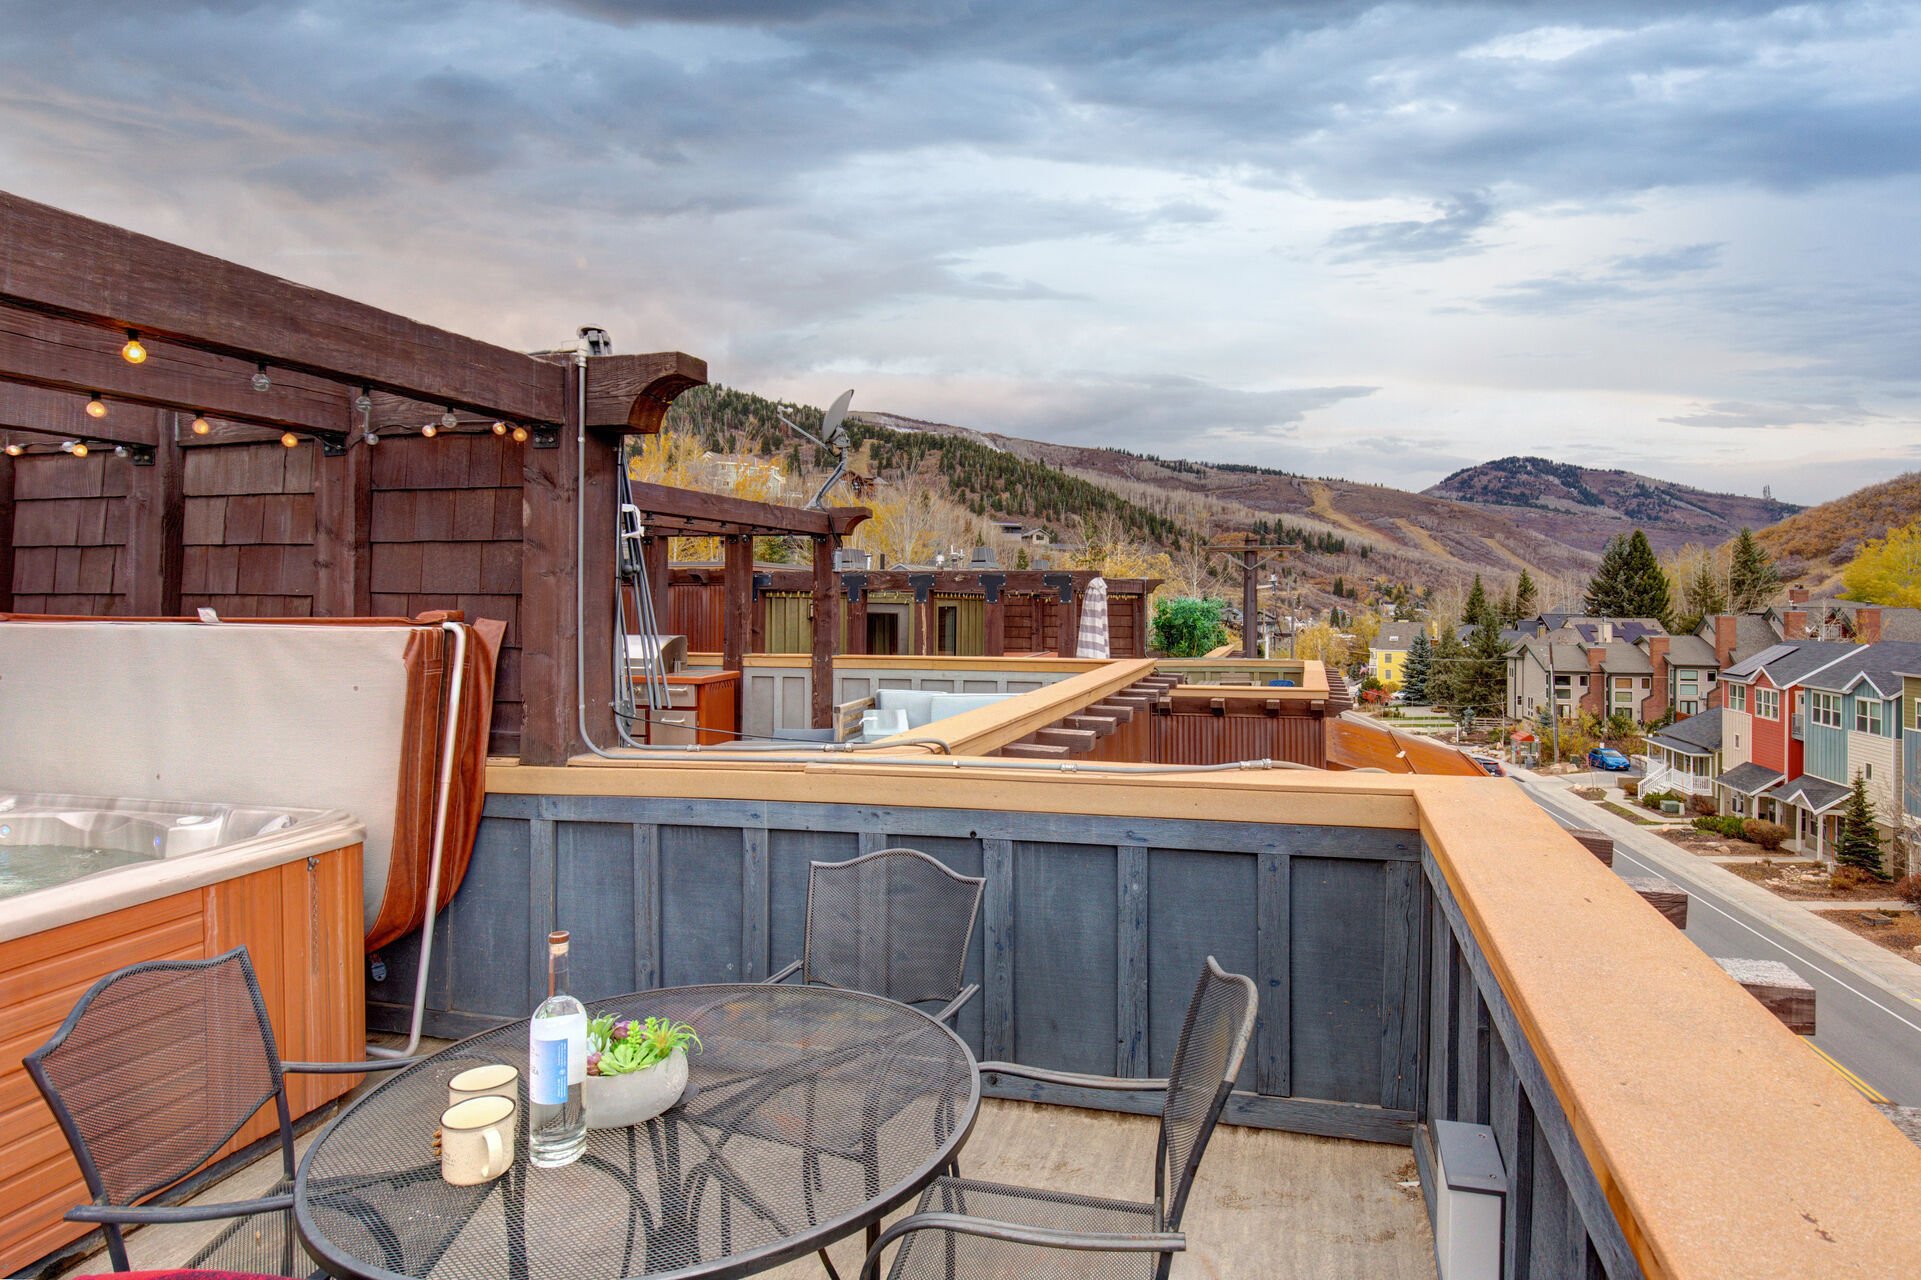 Private Roof Deck with Powder Room,  hot tub, two seating areas, outdoor fire-pit, BBQ, and stunning surrounding views of Park City